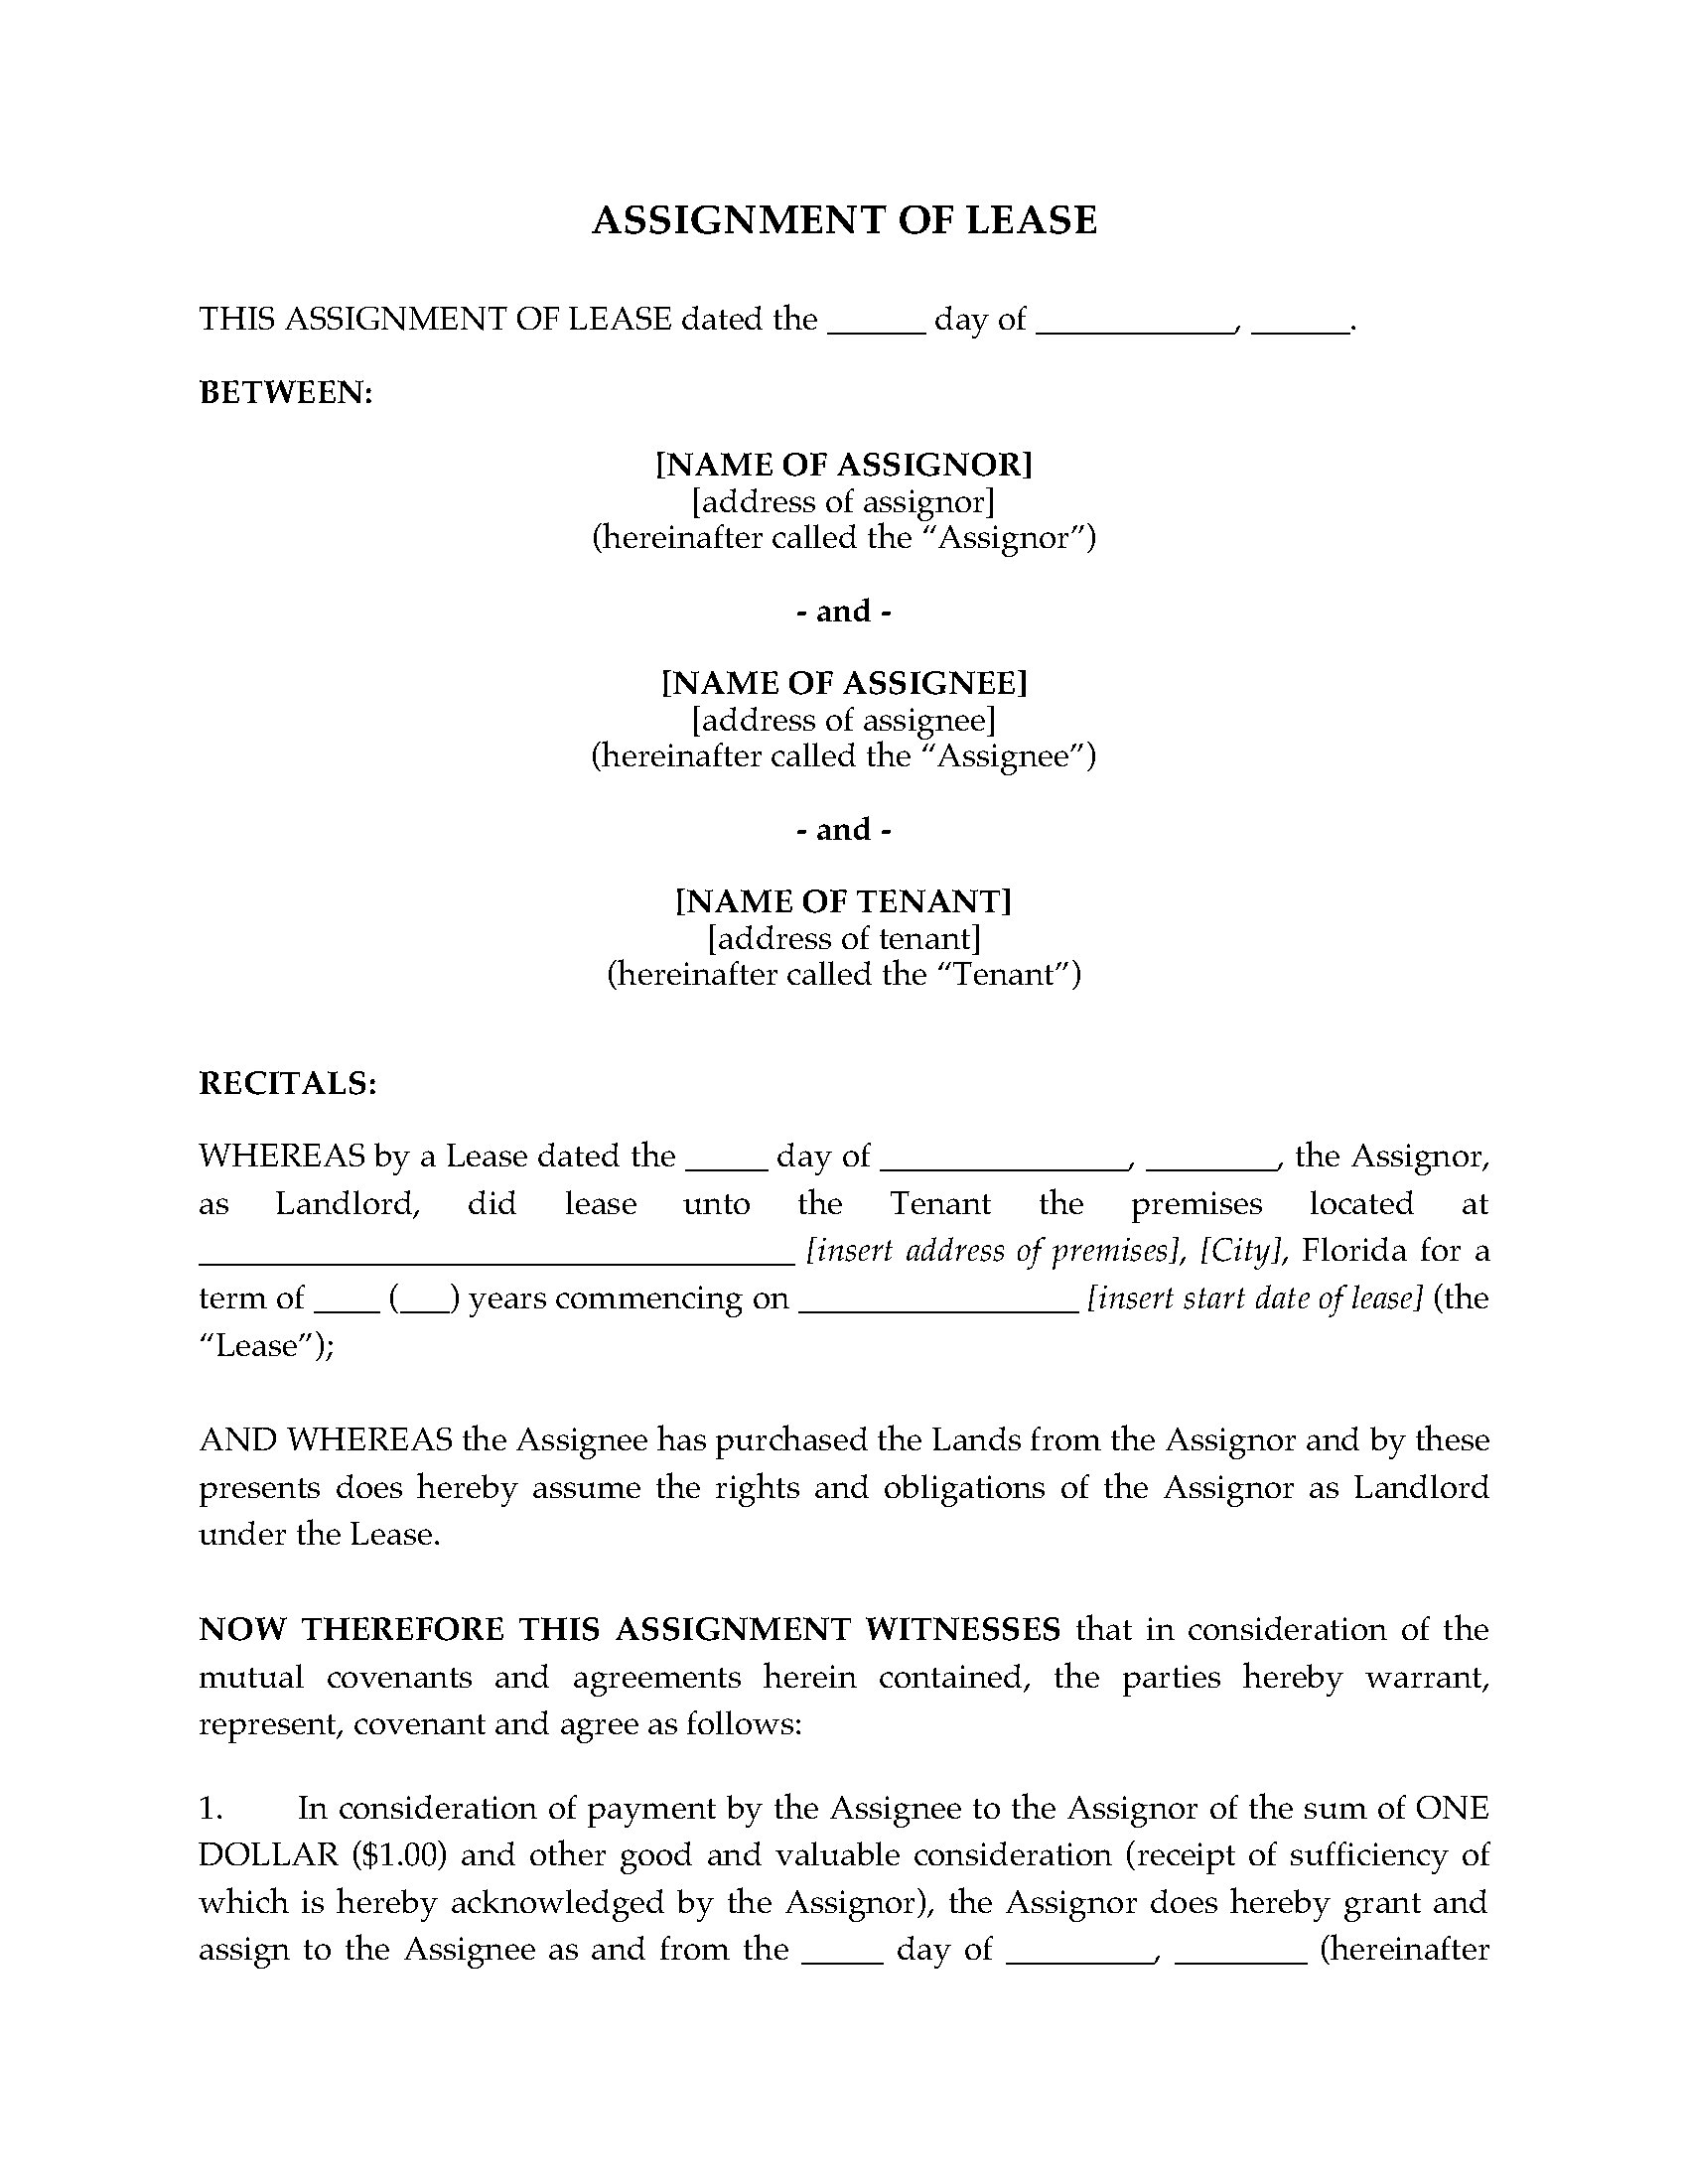 assignment of lease the assignee